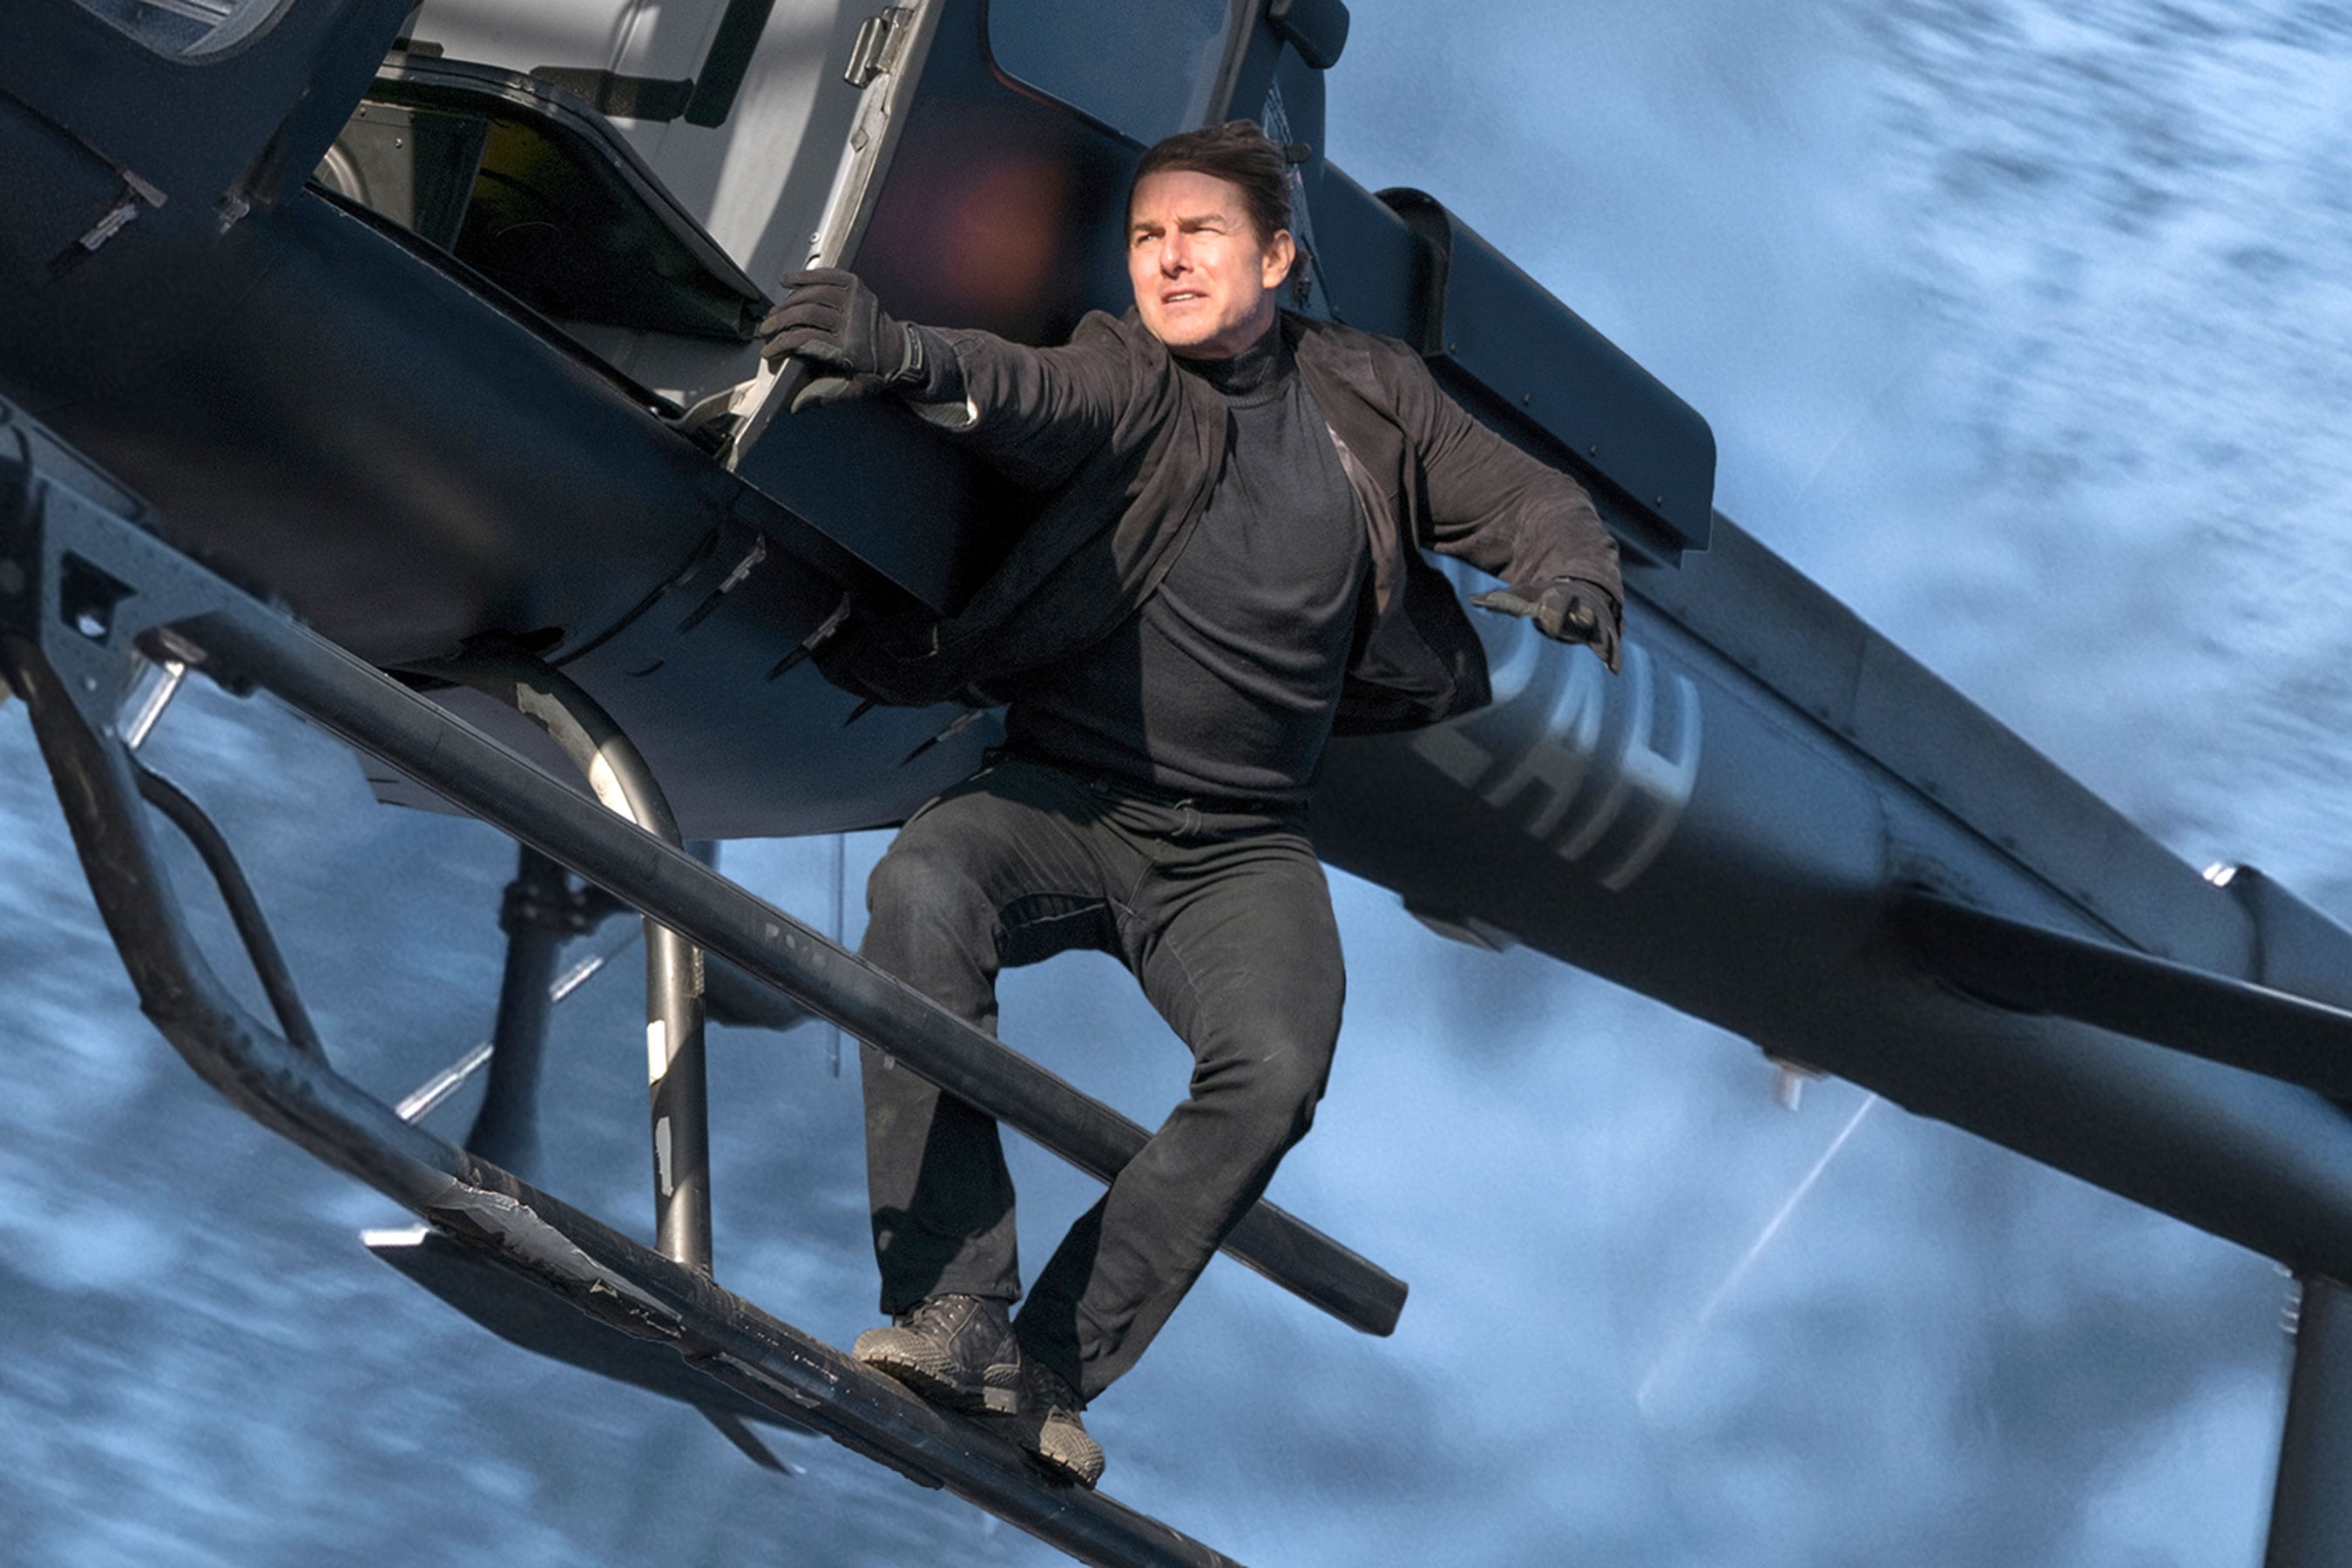 tom cruise movies mission impossible